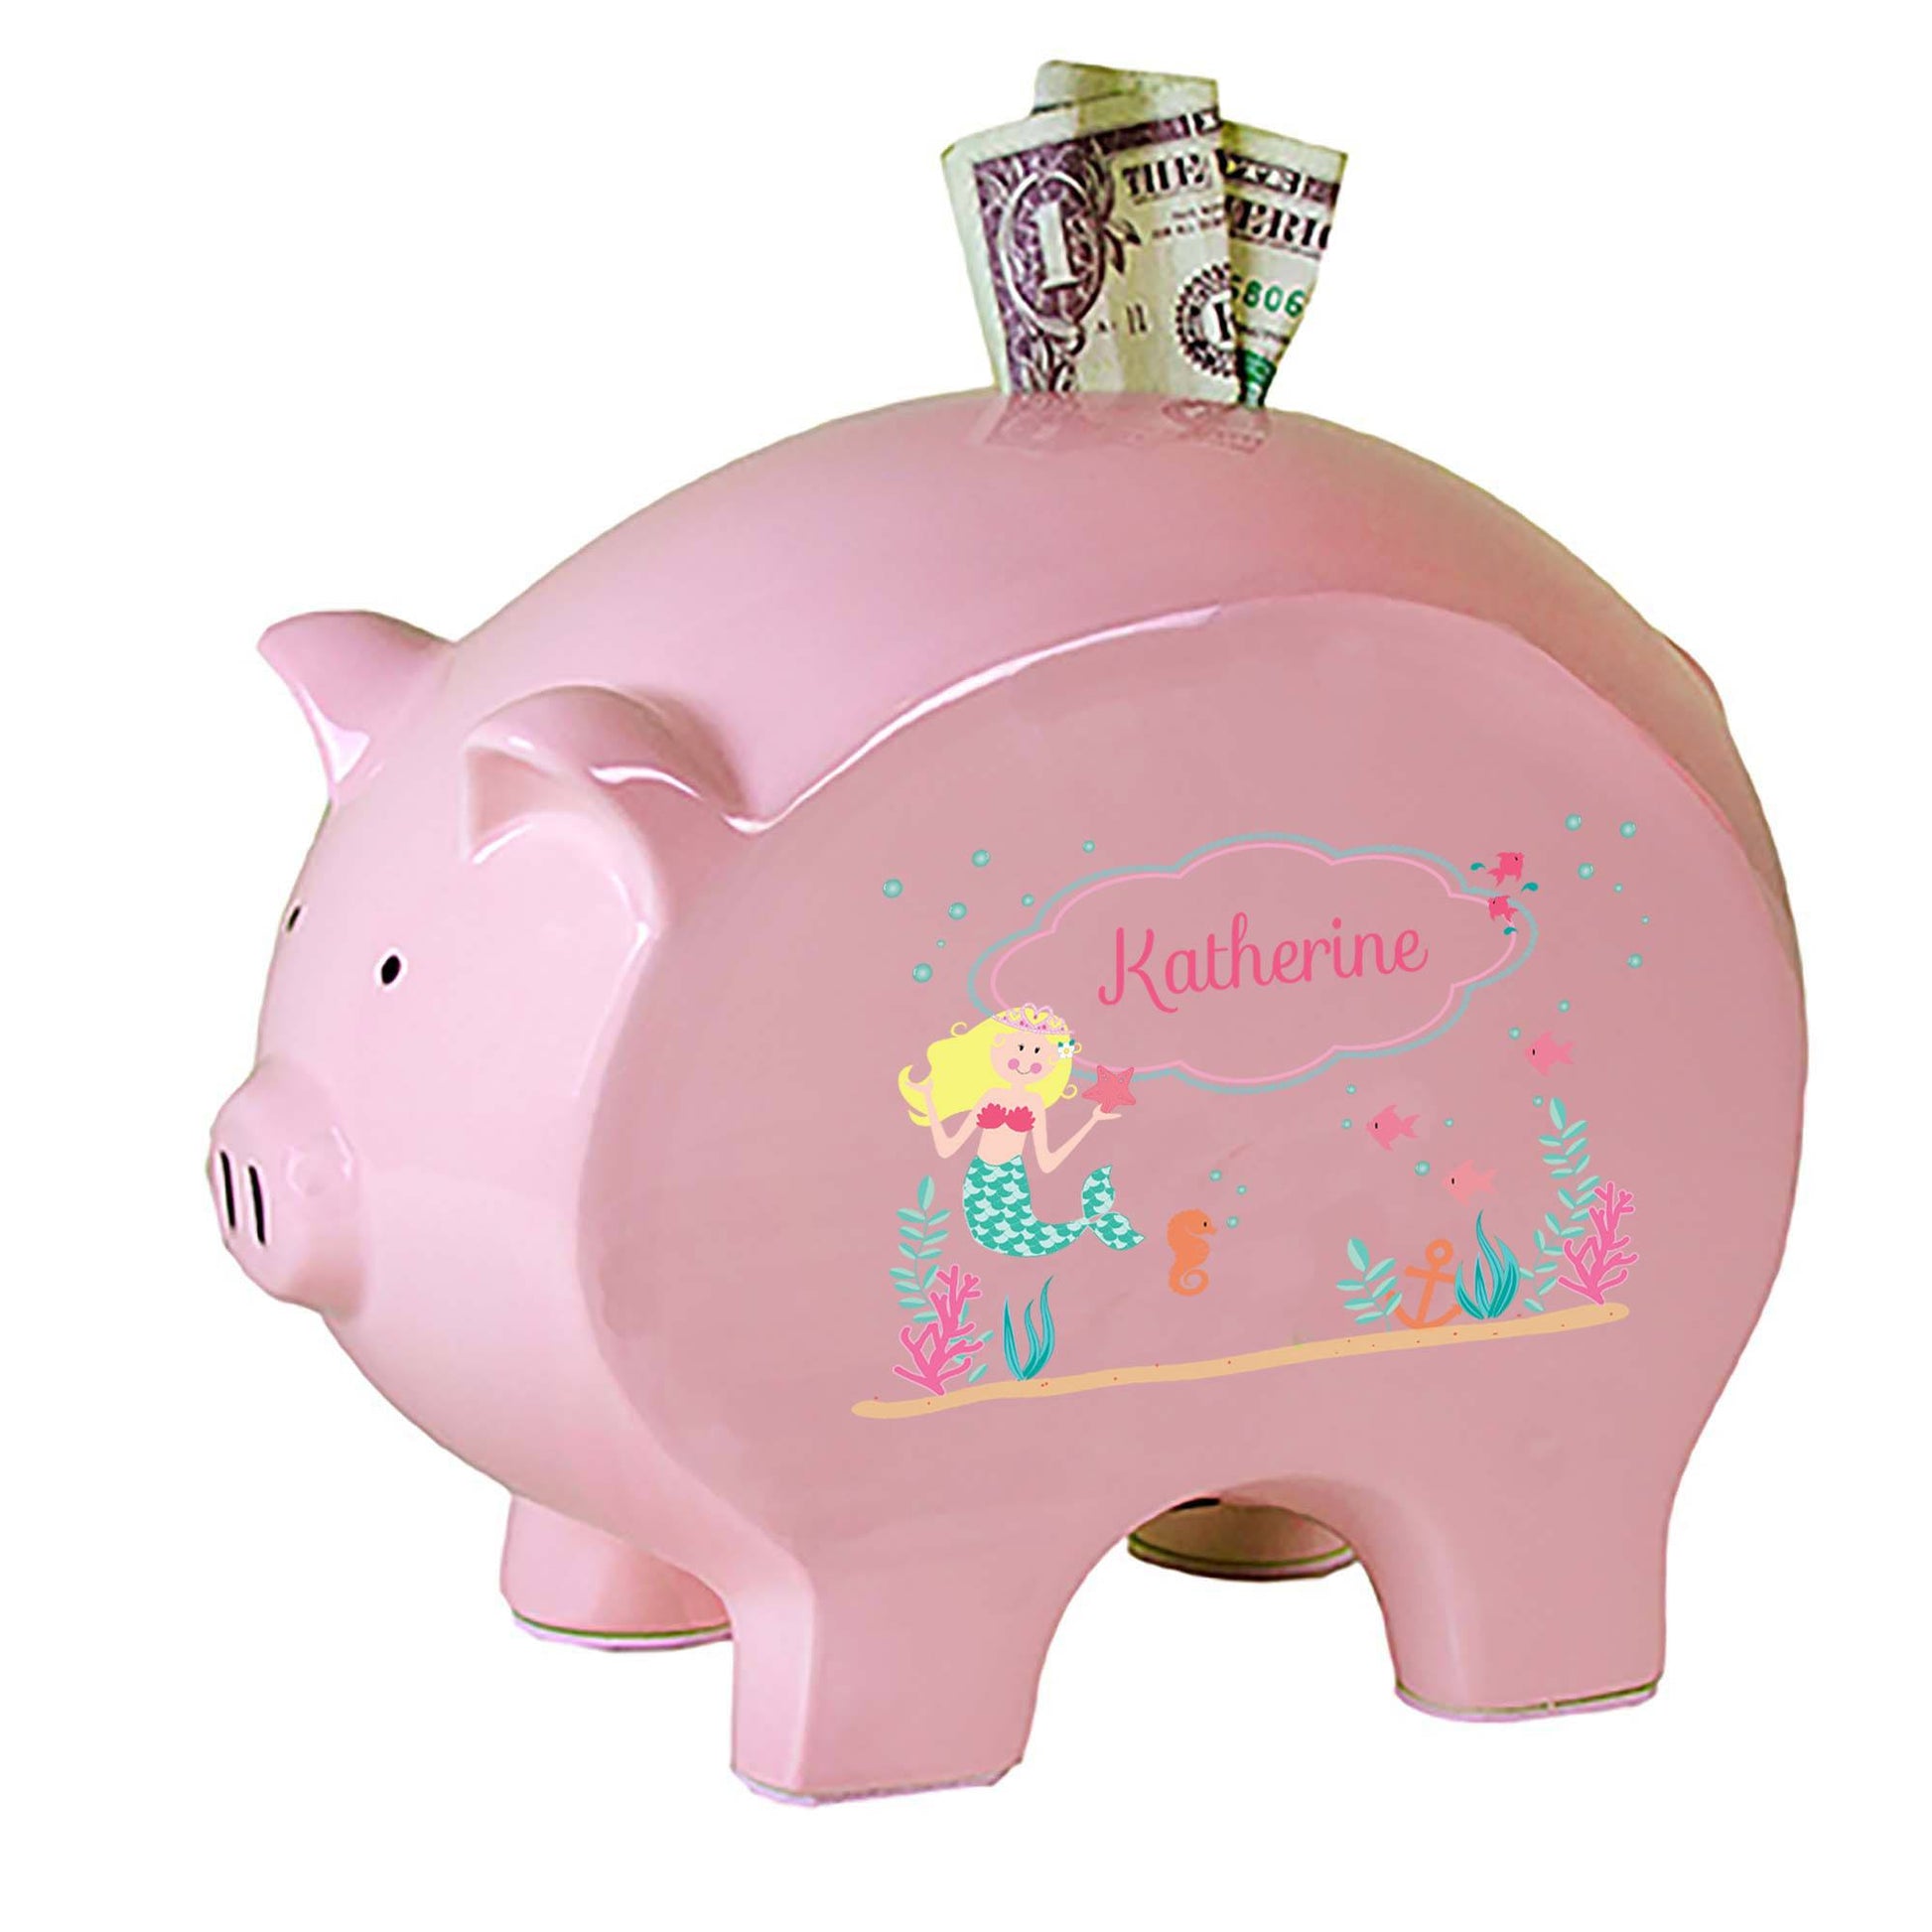 Personalized Pink Piggy Bank with Blonde Mermaid Princess design